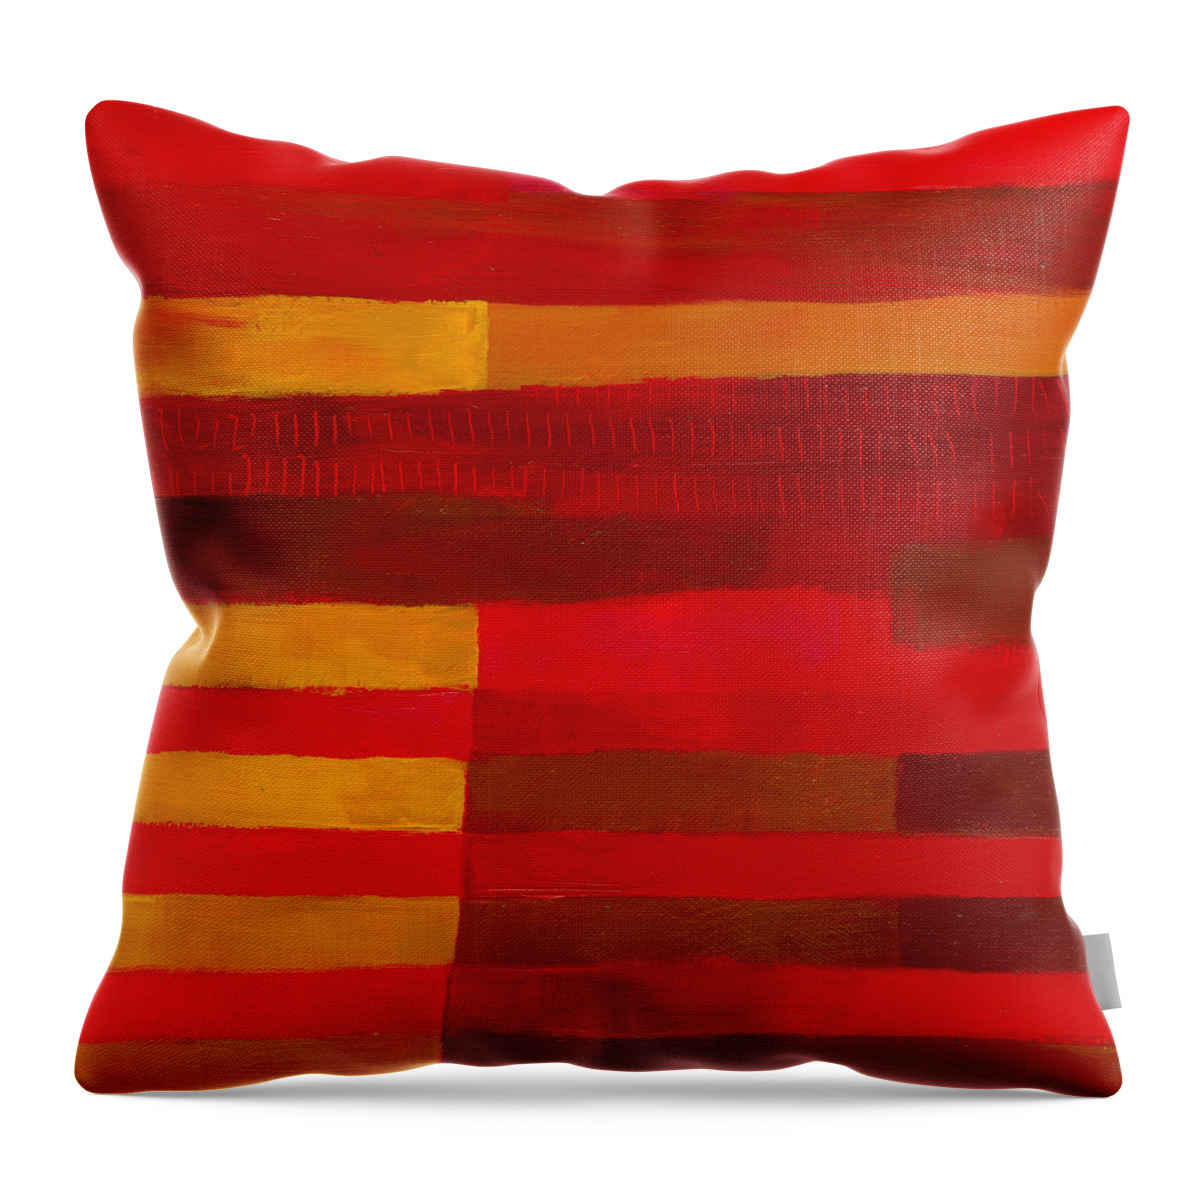 Abstract Art Throw Pillow featuring the painting Red Stripes 1 by Jane Davies